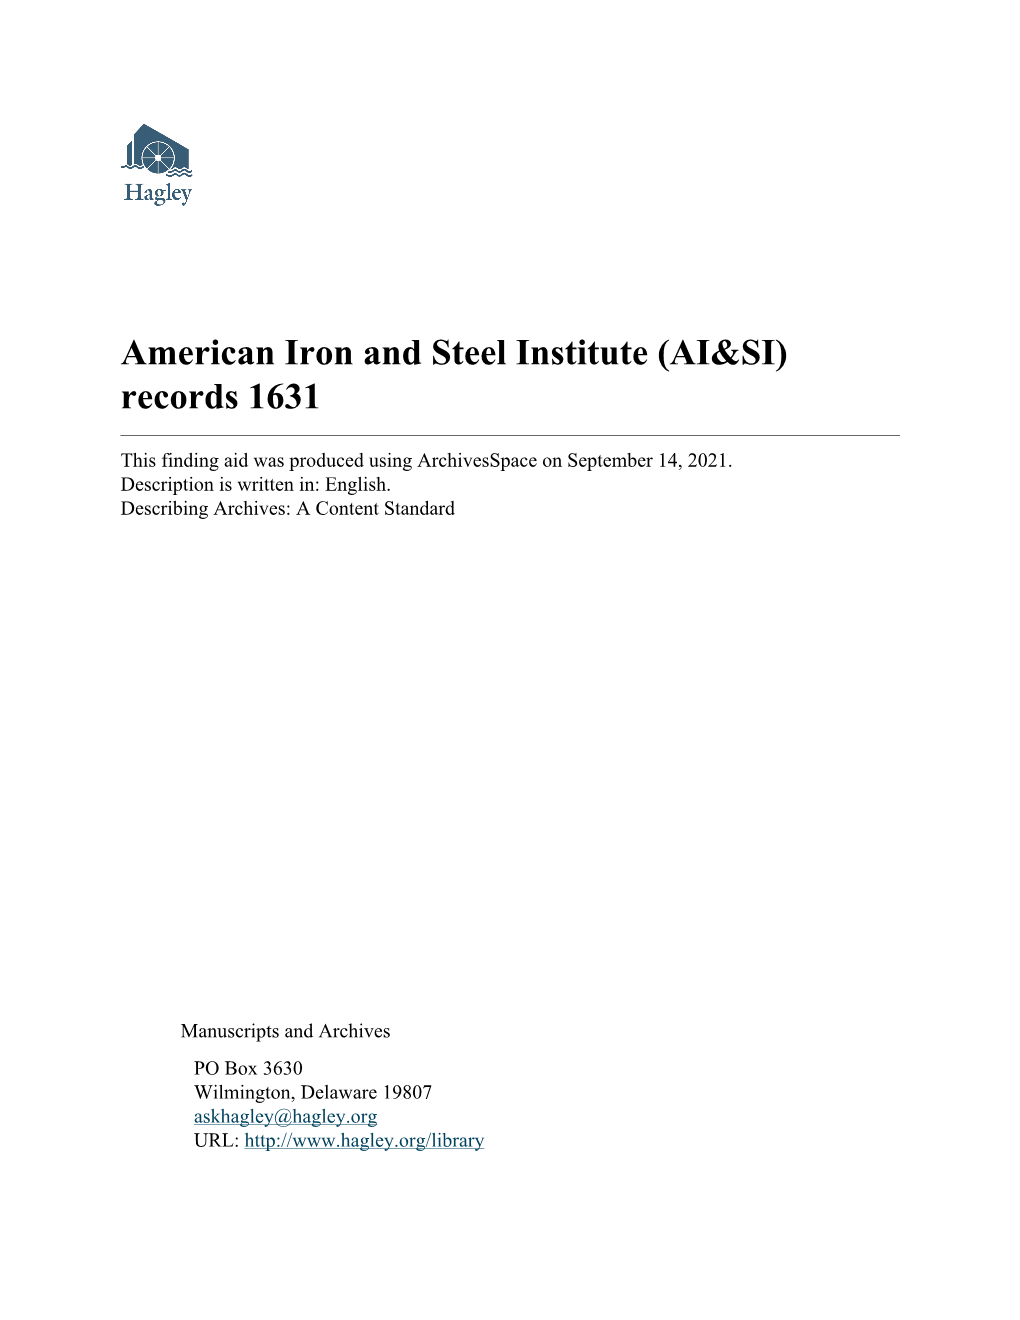 American Iron and Steel Institute (AI&SI) Records 1631